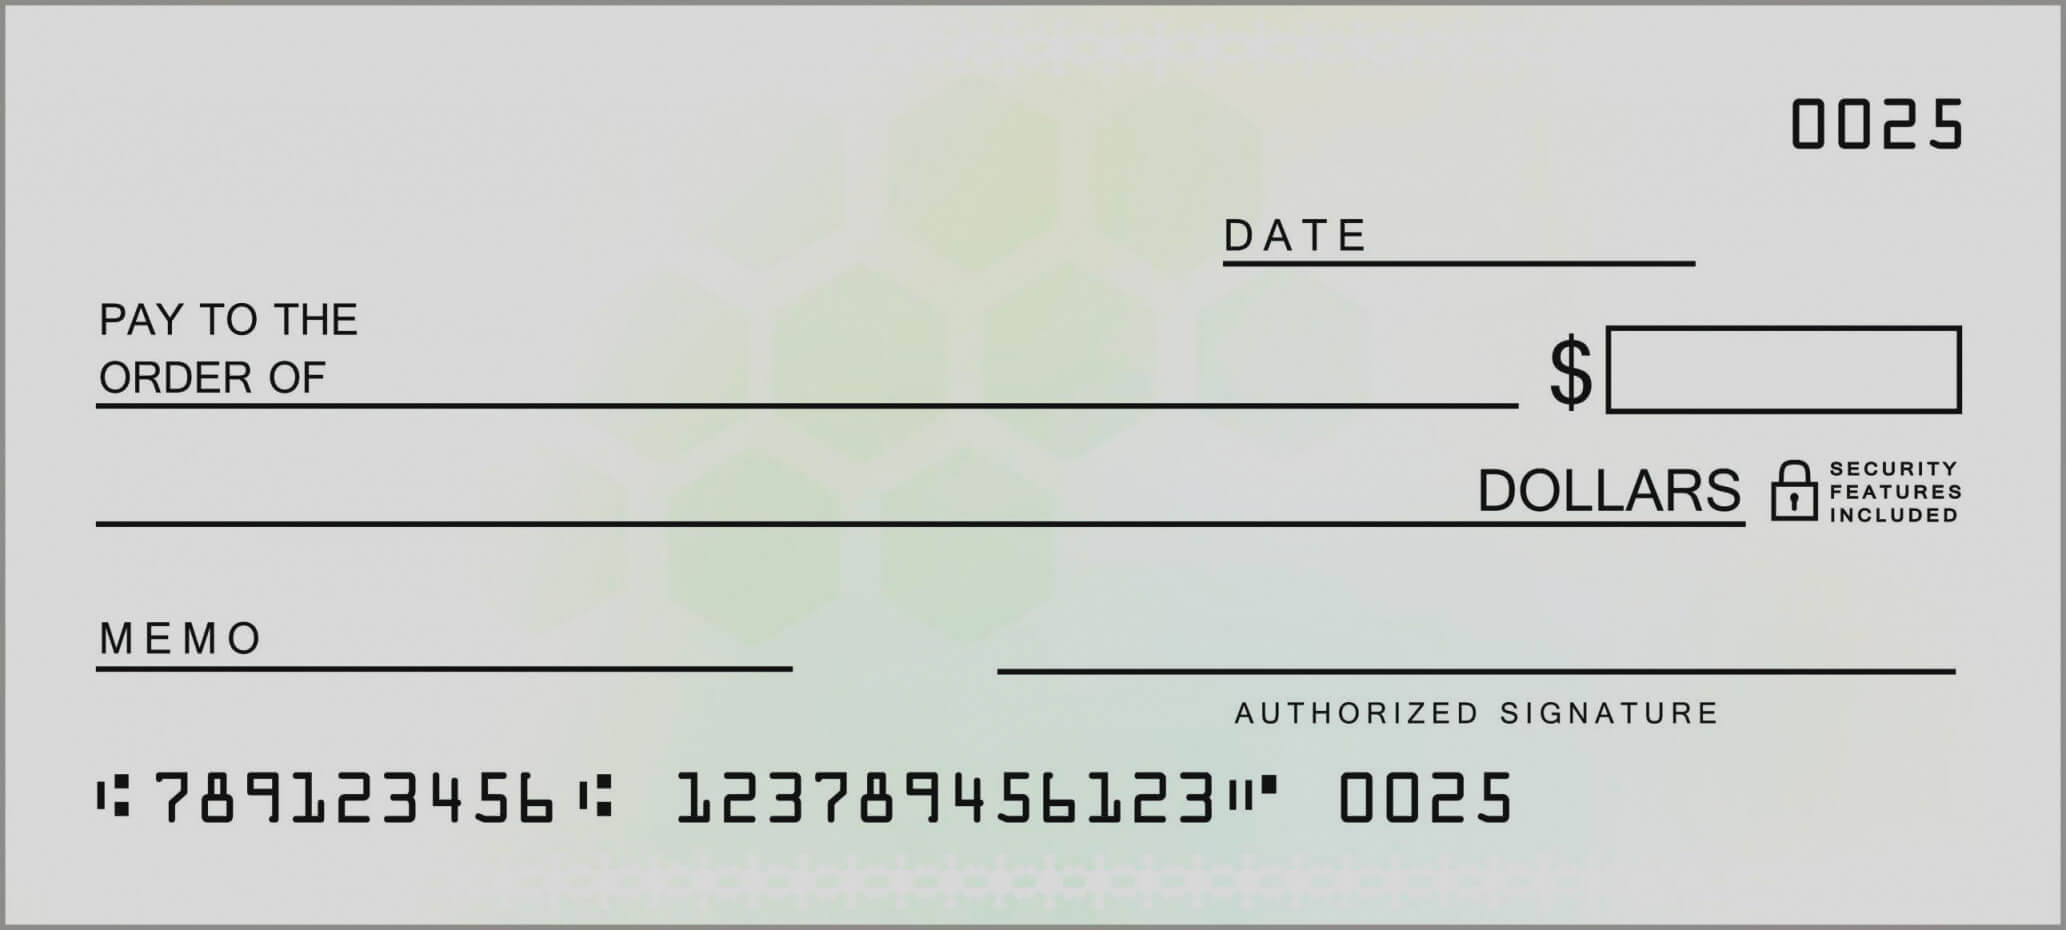 021 Fake Blank Check Template Cheque Free Awesome Payroll Intended For Editable Blank Check Template